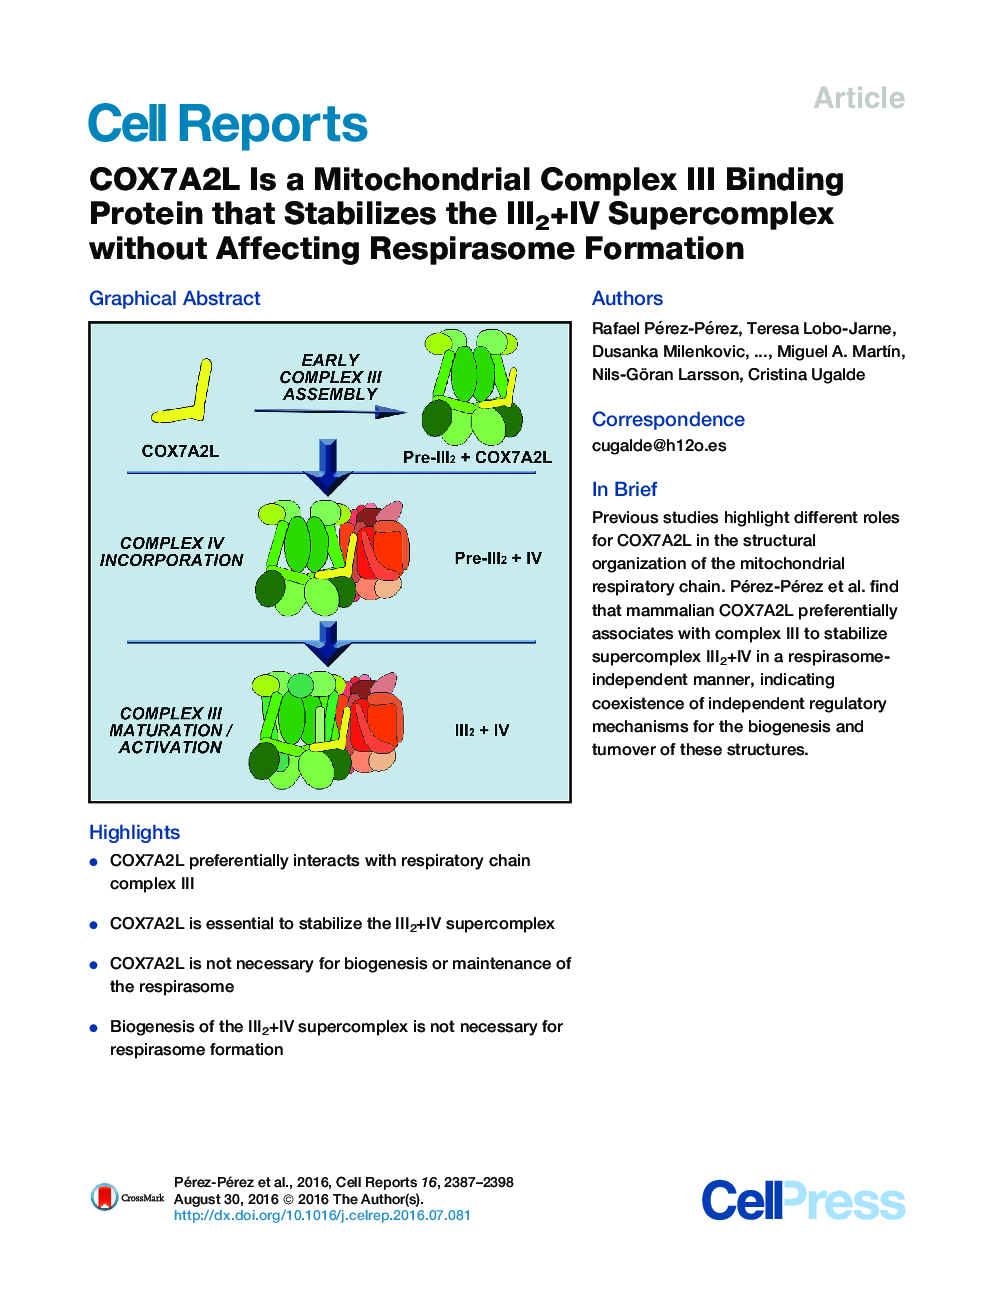 COX7A2L Is a Mitochondrial Complex III Binding Protein that Stabilizes the III2+IV Supercomplex without Affecting Respirasome Formation